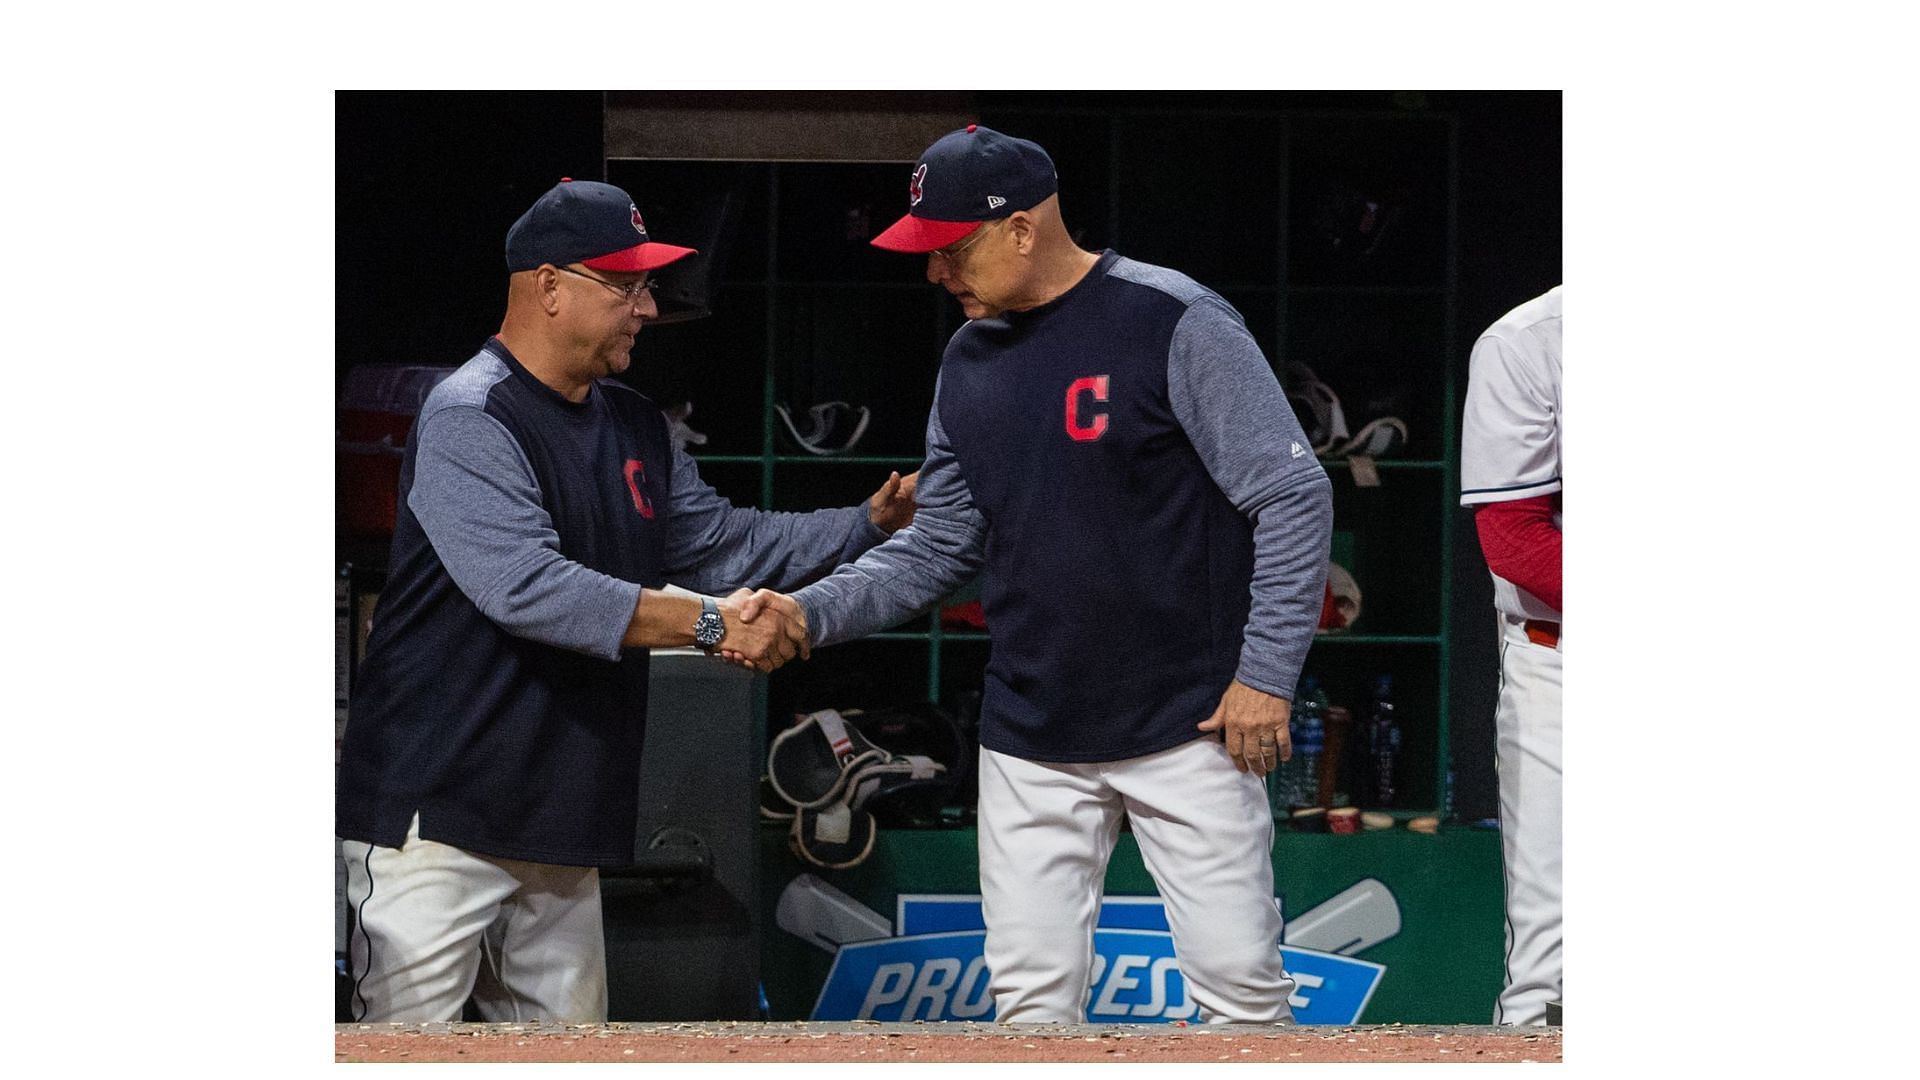 Bench Coach assisting the manager